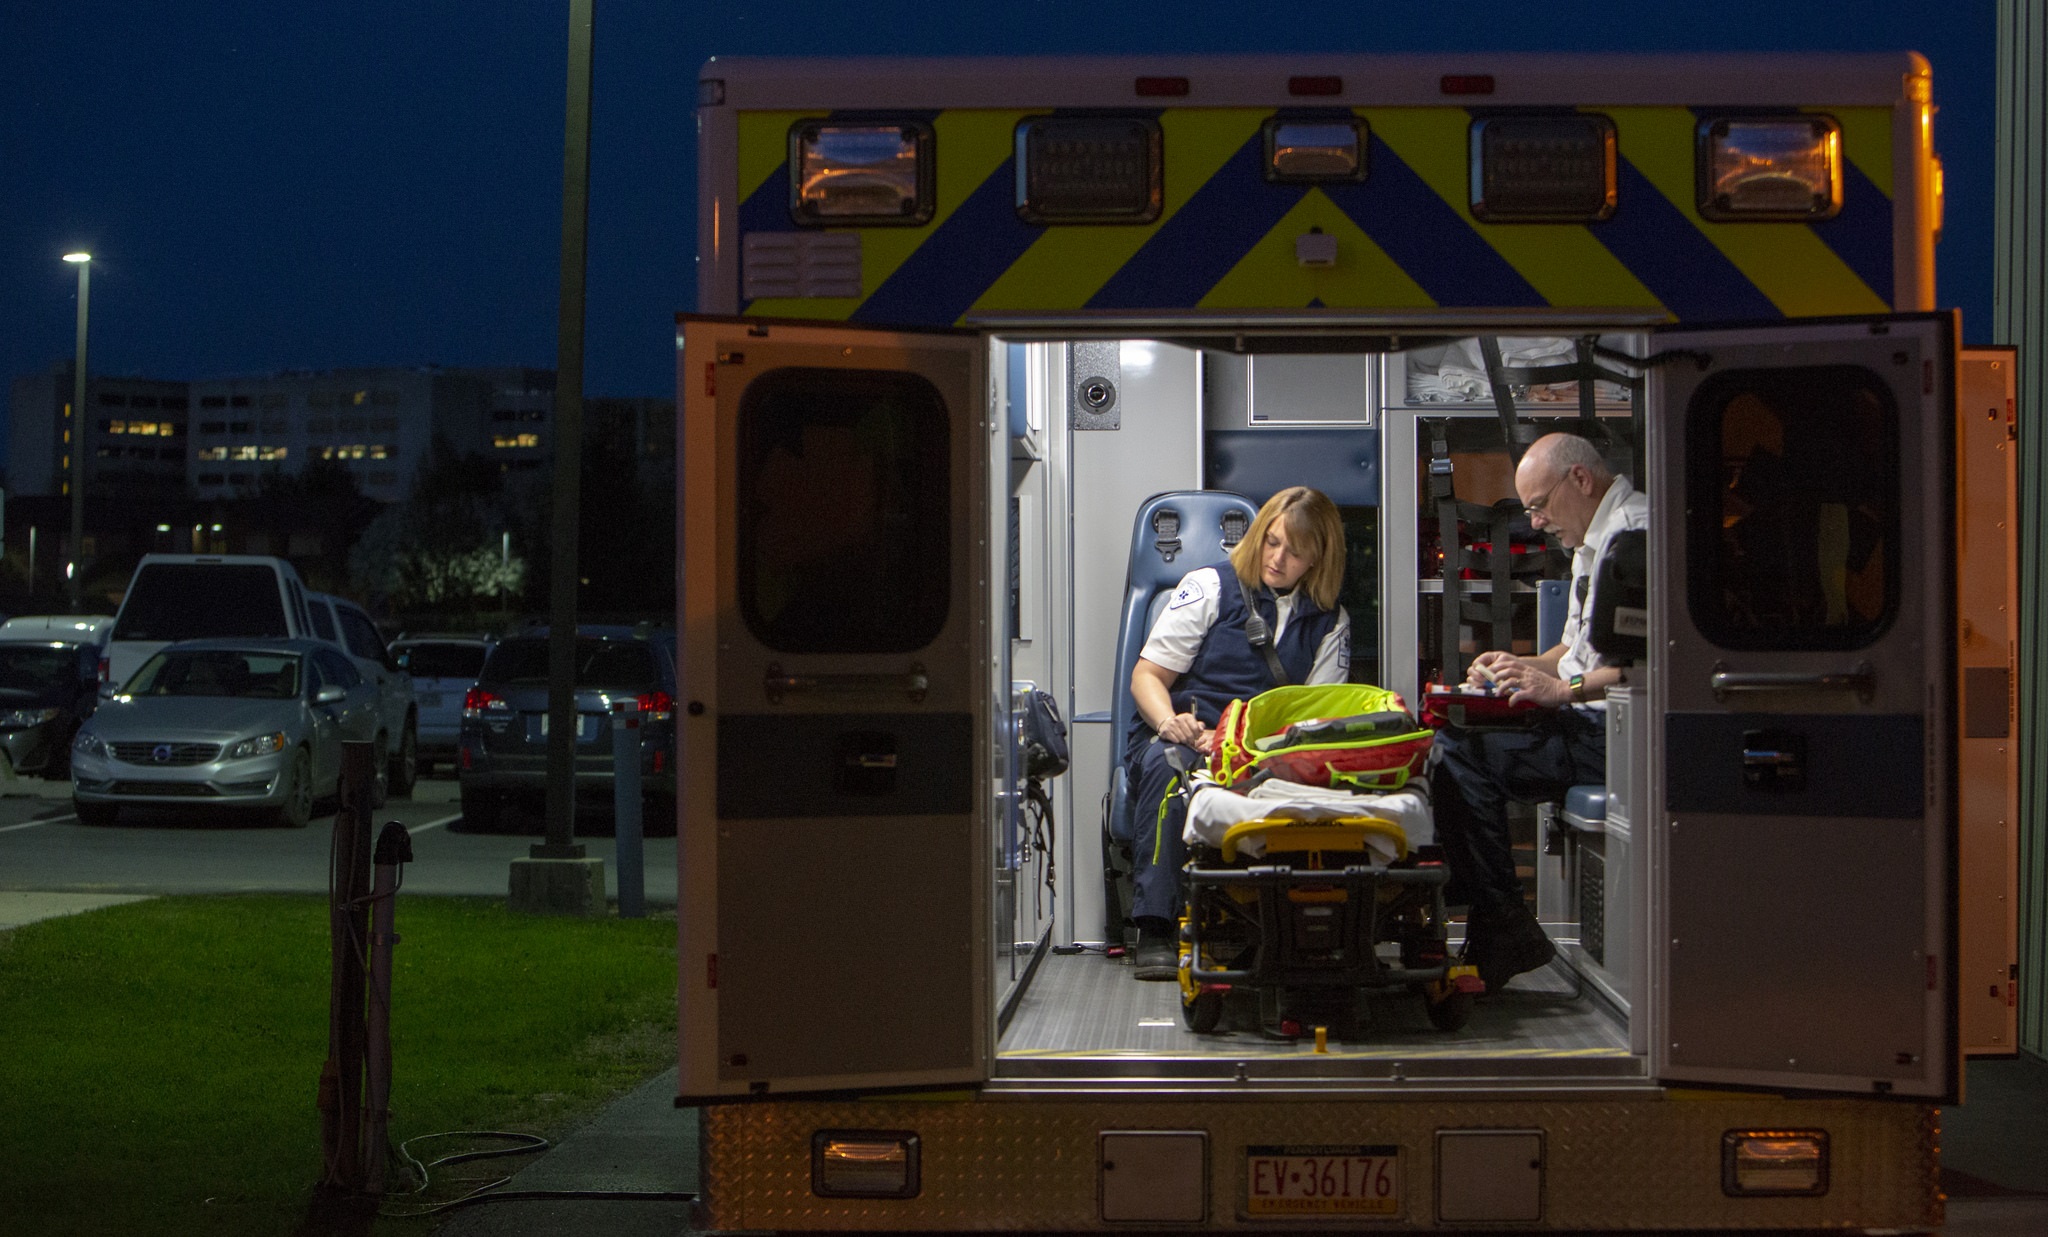 Amber Lewis, left, an EMT with Penn State Health Life Lion EMS, and paramedic Dave Heim sit in the back of a Life Lion ambulance at night. The doors of the ambulance are open, and the ambulance is in a parking lot. Amber is writing on a notepad, and Mike adds supplies to a medical kit. Another medical kit is lying on a gurney between them.